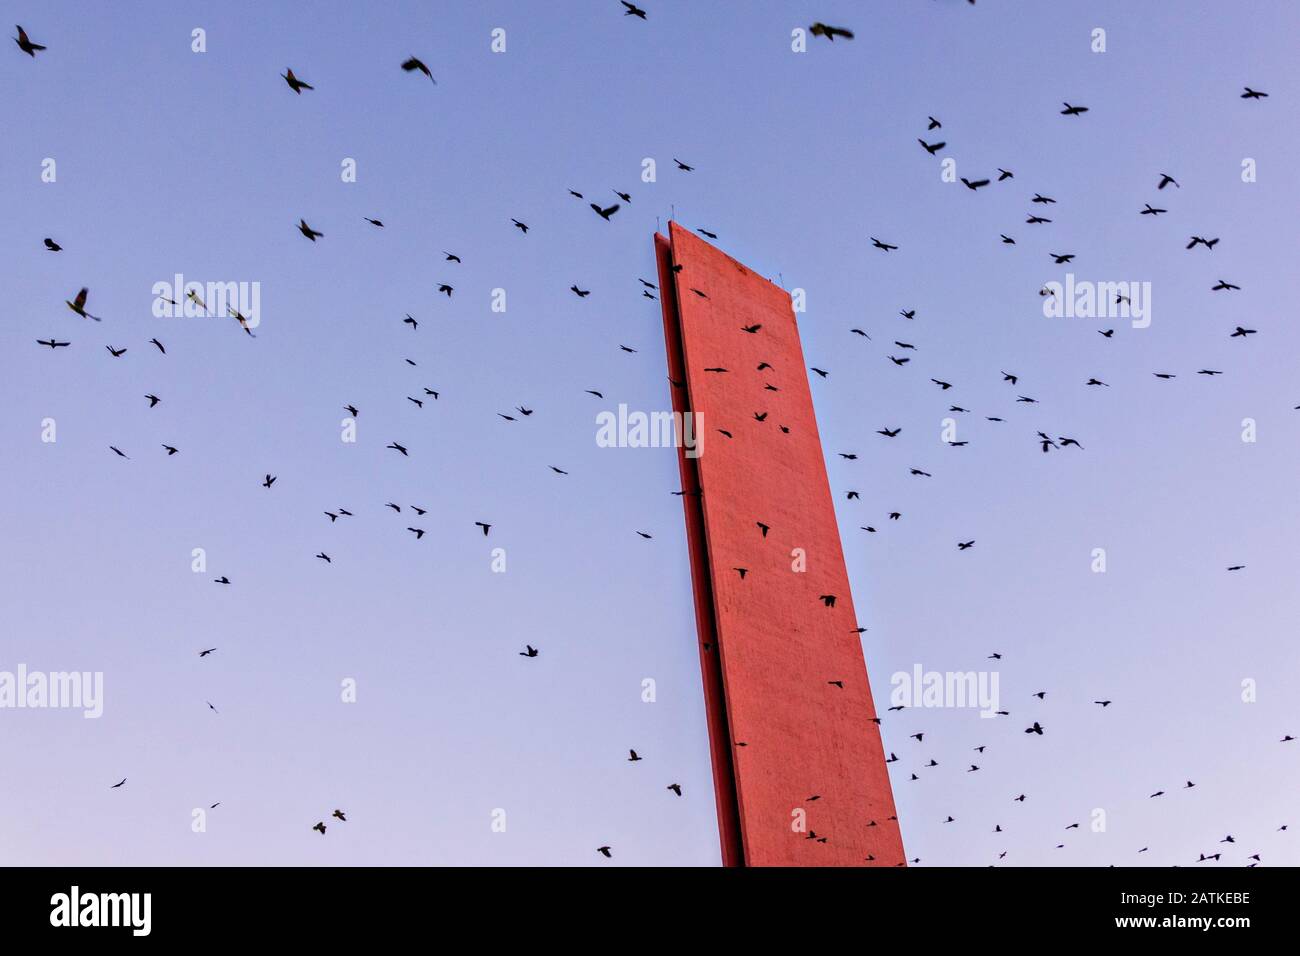 The Lighthouse of Commerce or Faro de Comercio monument is swarmed by flocks of wild parrots at sunset in the Macroplaza square in the Barrio Antiguo neighborhood of Monterrey, Nuevo Leon, Mexico. The modernist monument was designed by Mexican architect Luis Barragan and built to commemoration the100th anniversary of the Monterrey Chamber of Commerce. Stock Photo